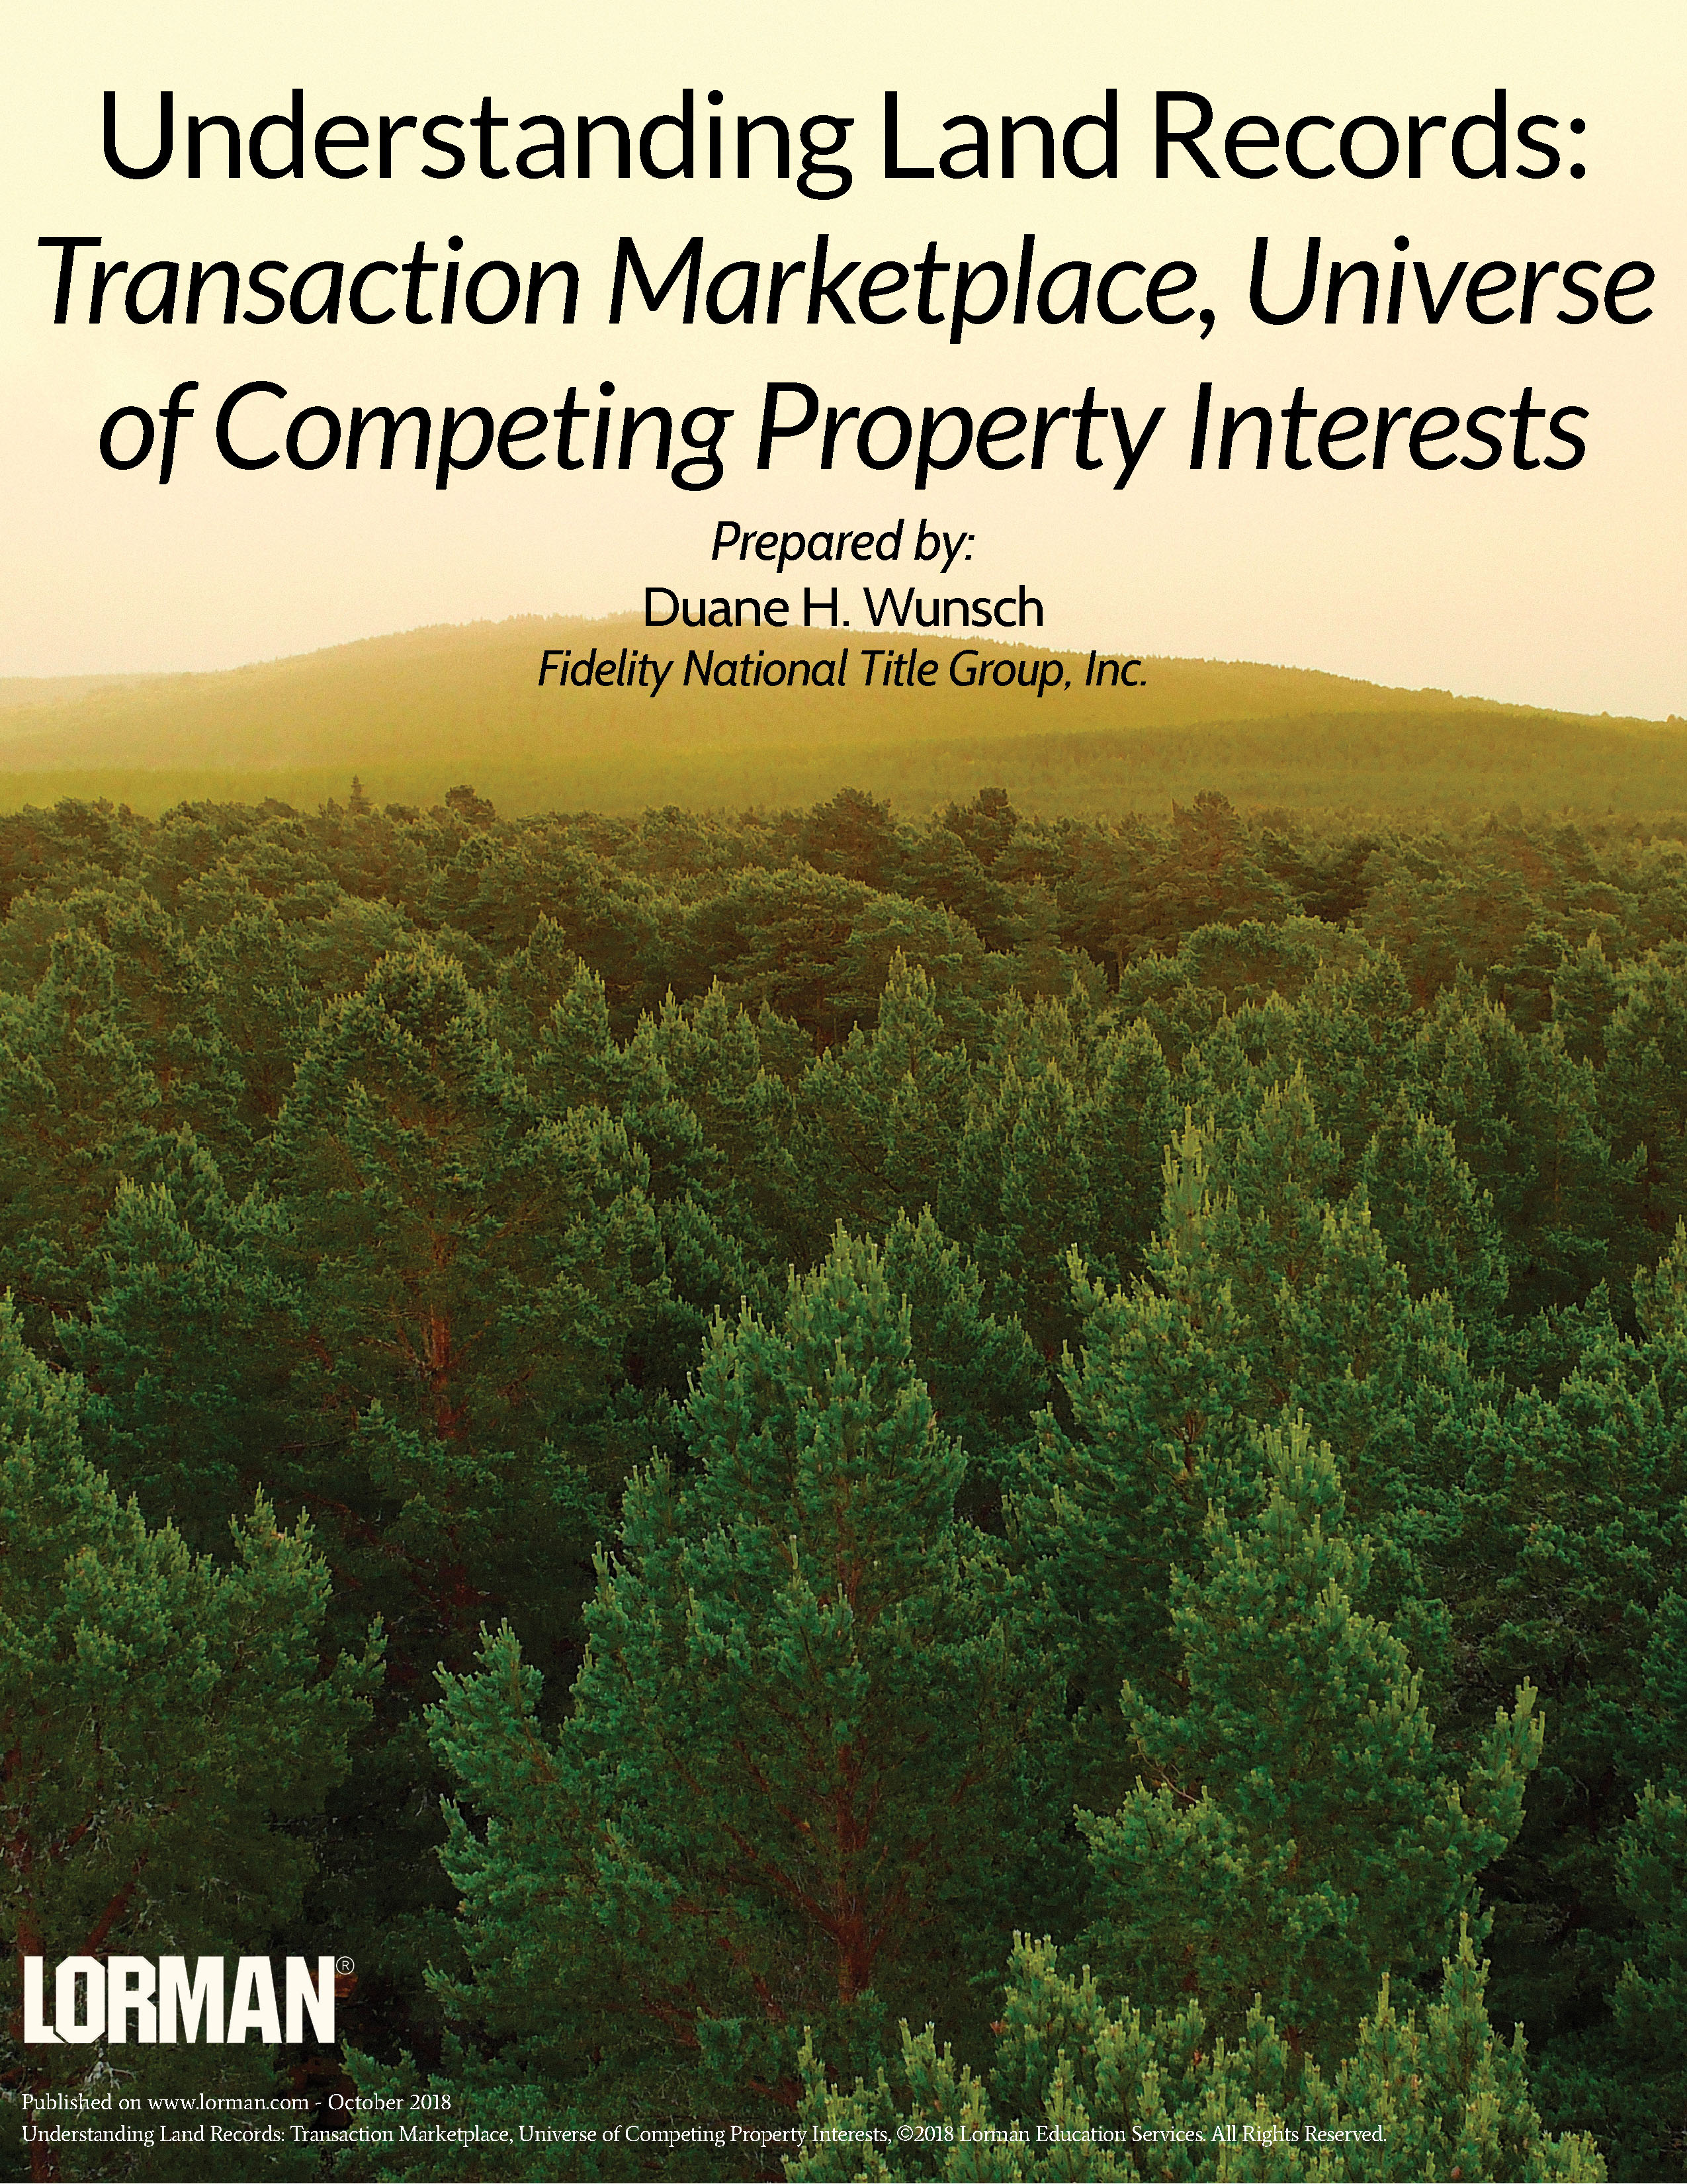 Understanding Land Records: Transaction Marketplace, Universe of Competing Property Interests